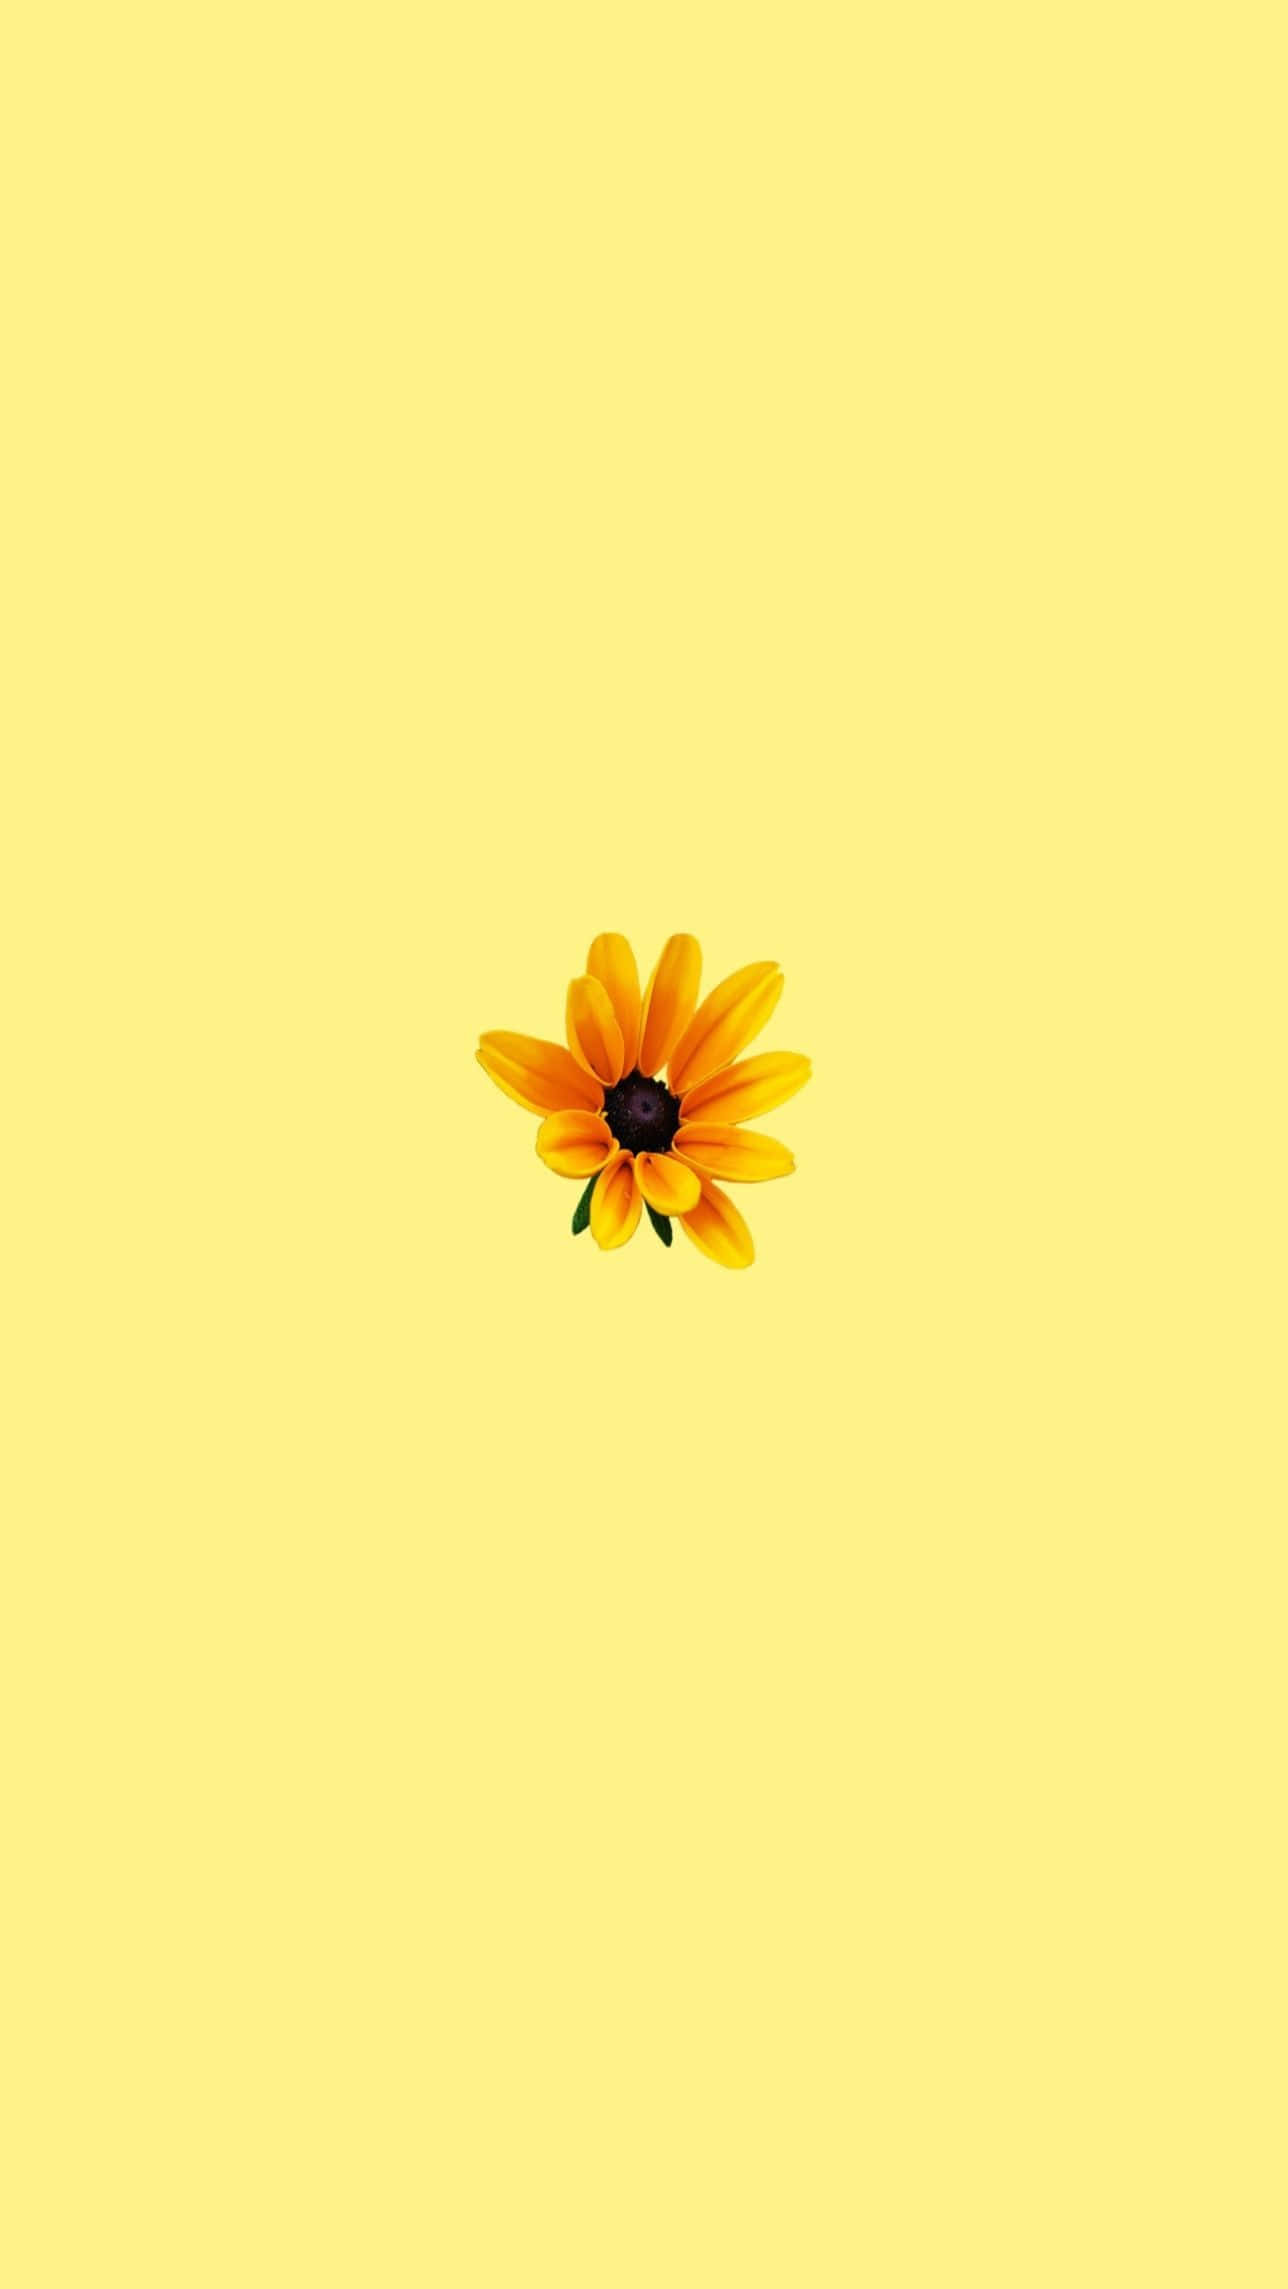 A Yellow Flower On A Yellow Background